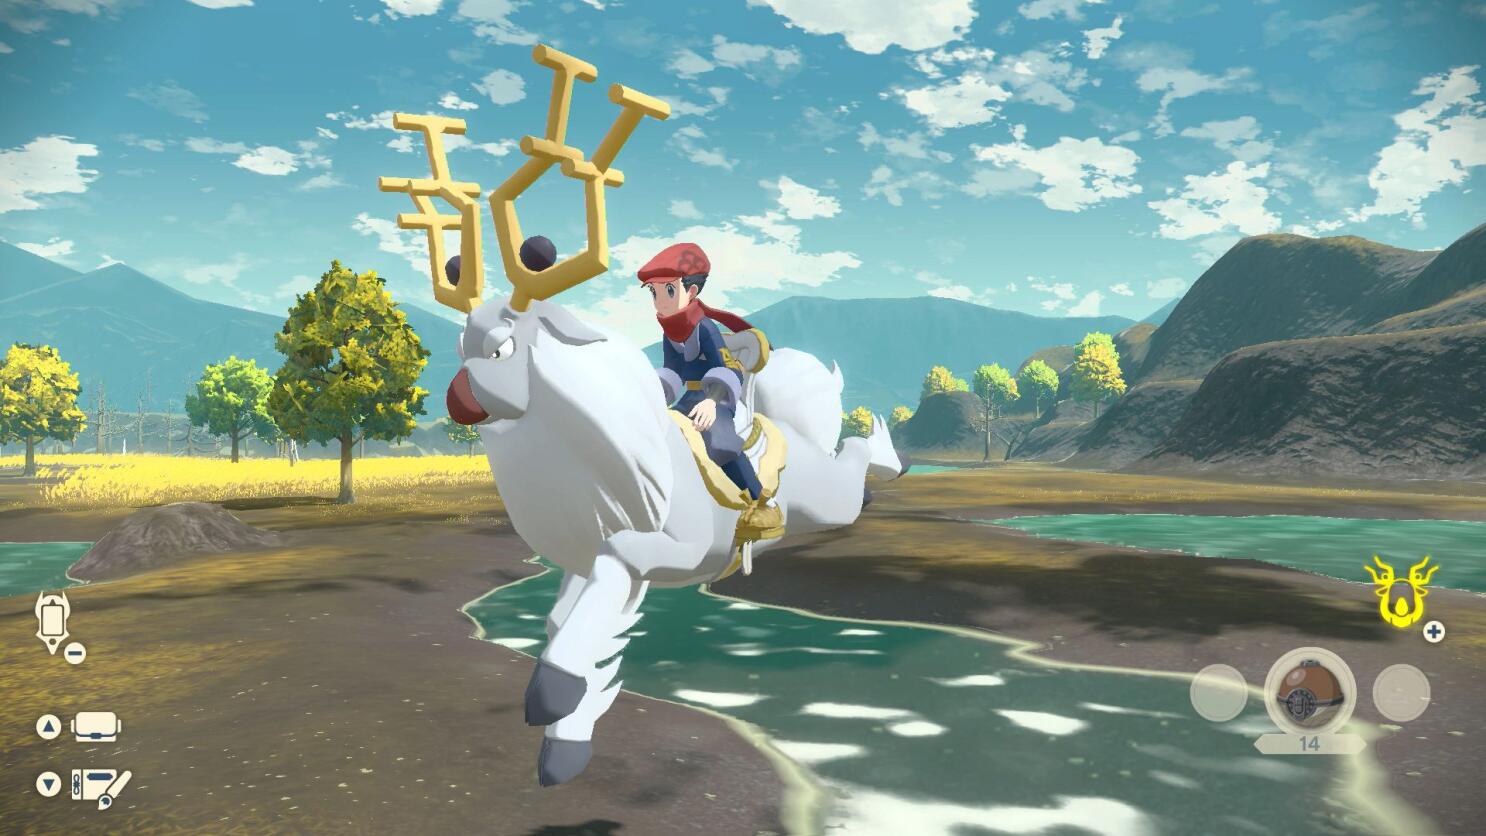 Pokémon Legends: Arceus Release Time: When Will the Game Be Playable?